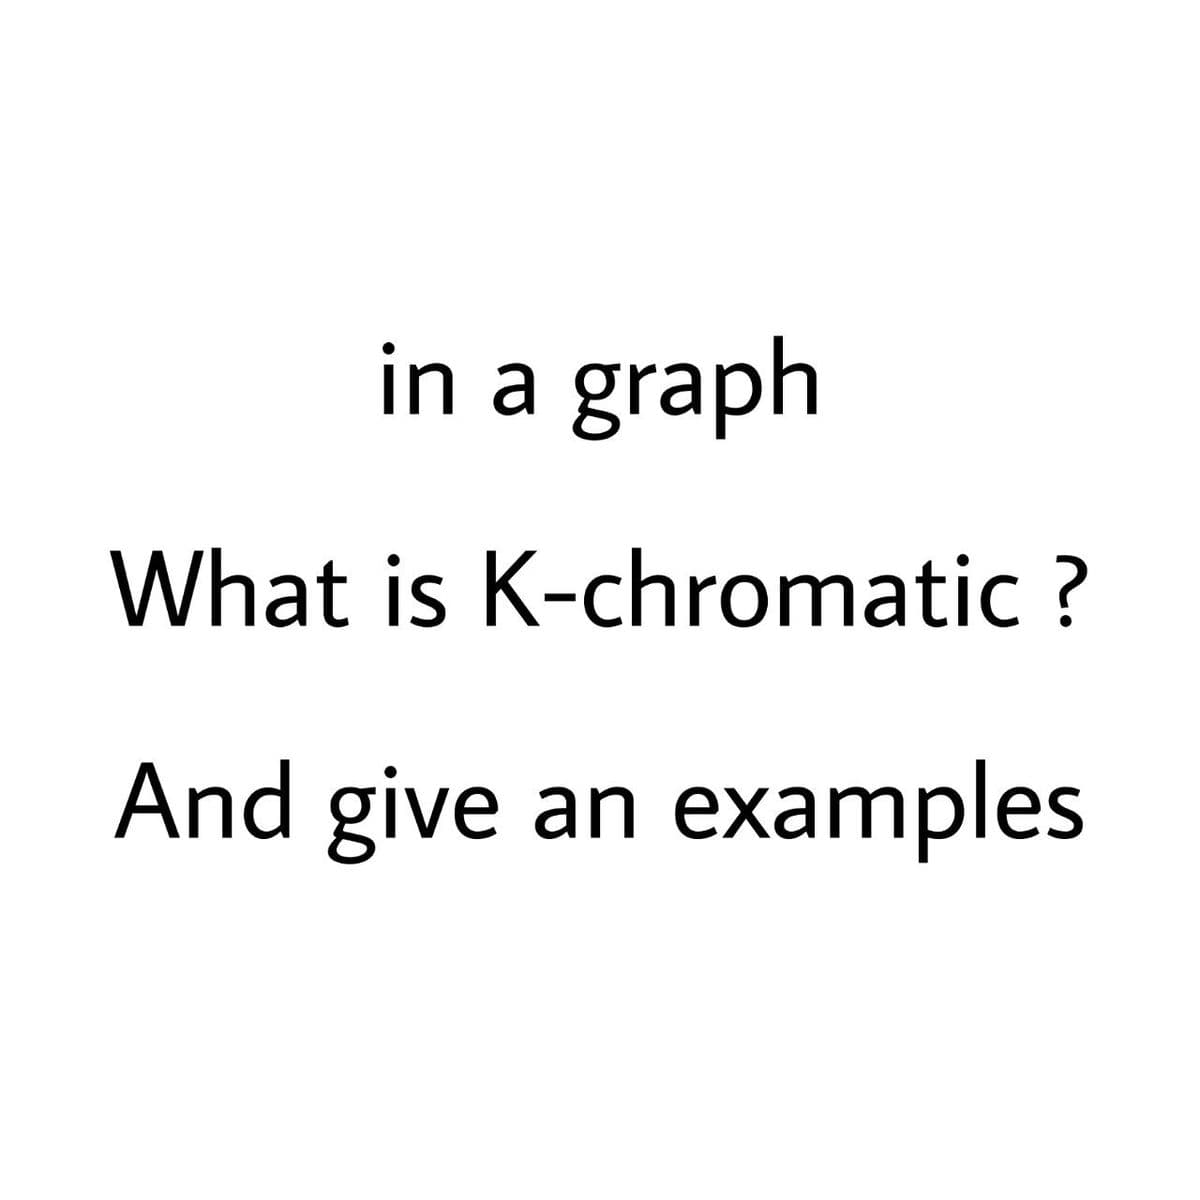 in a graph
What is K-chromatic ?
And give an examples
